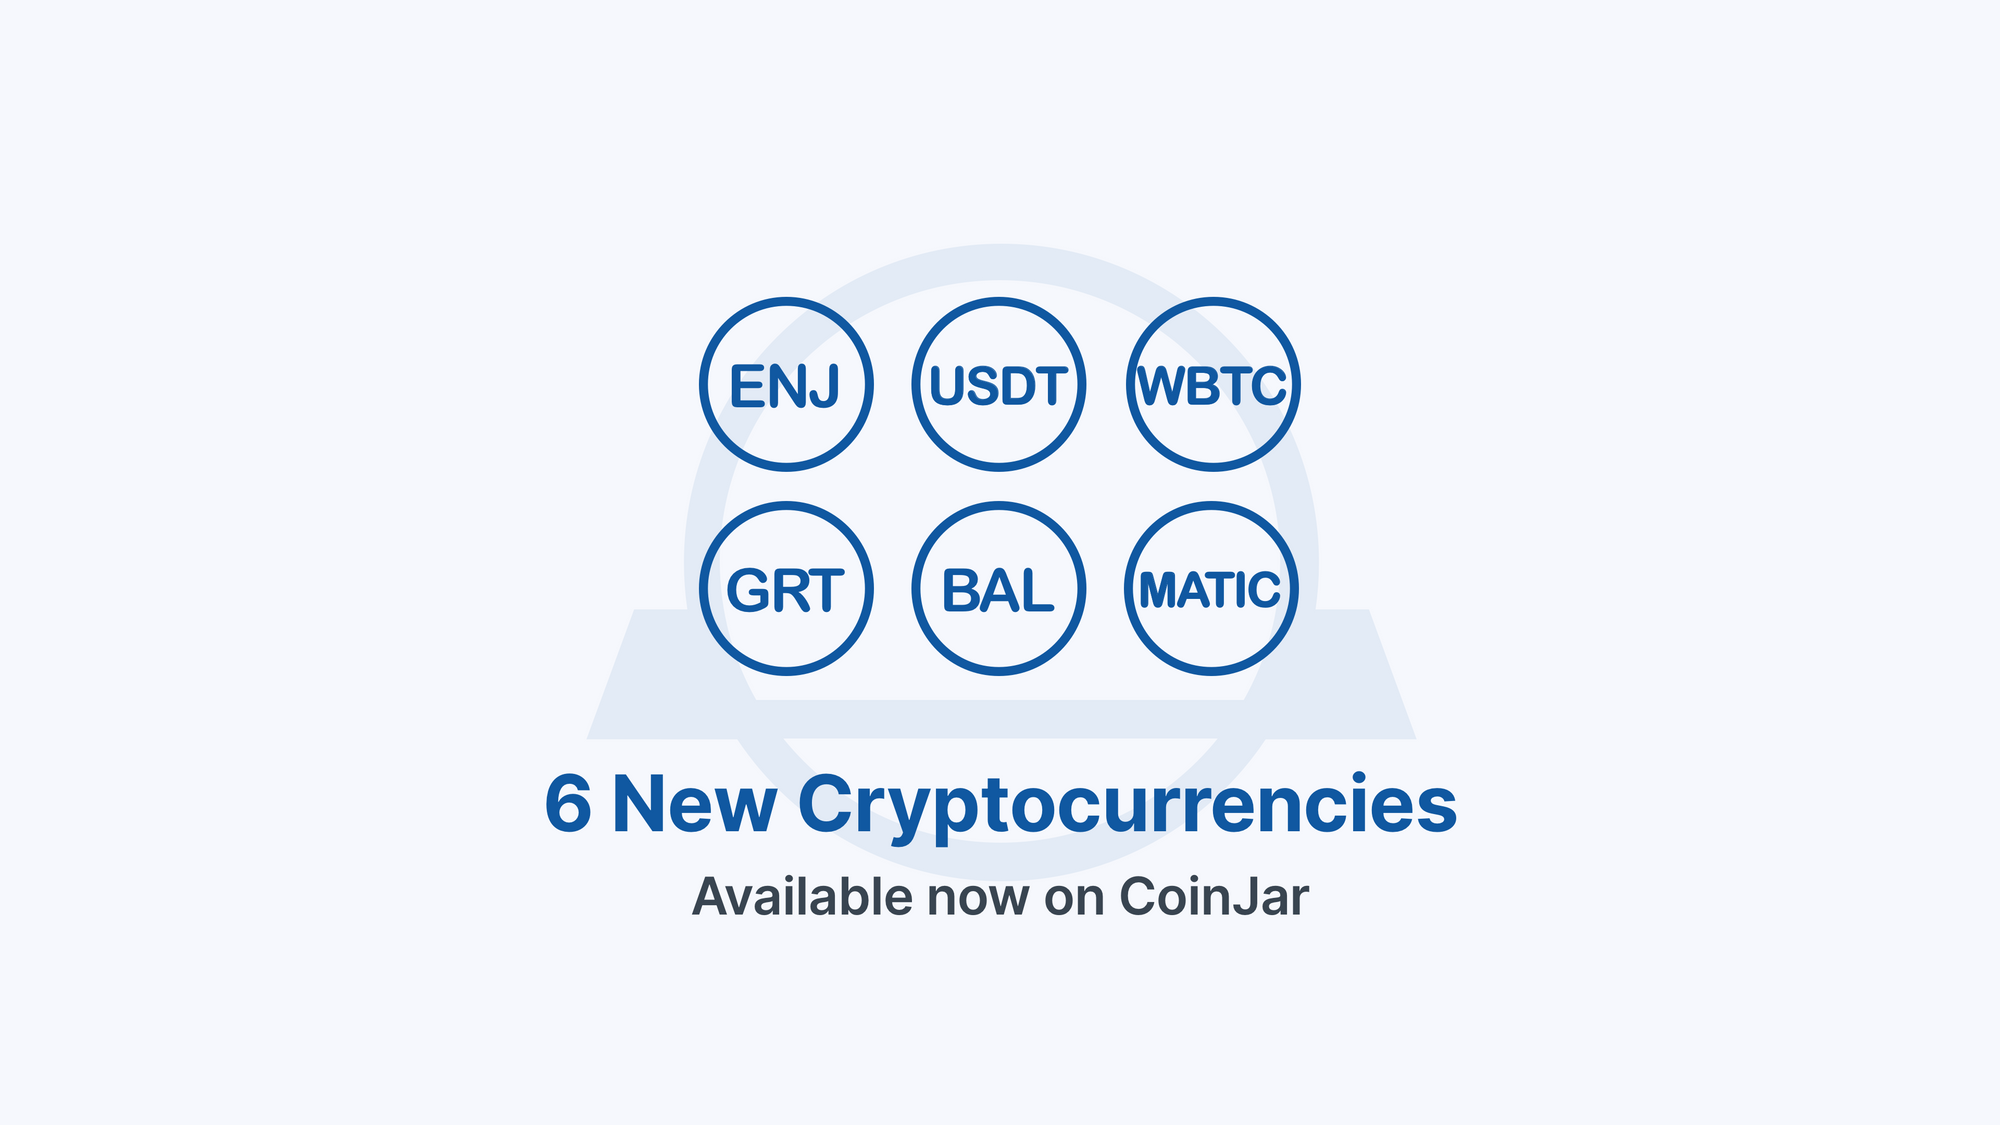 MATIC, USDT, BAL, WBTC + 2 more cryptocurrencies now available for trading on CoinJar